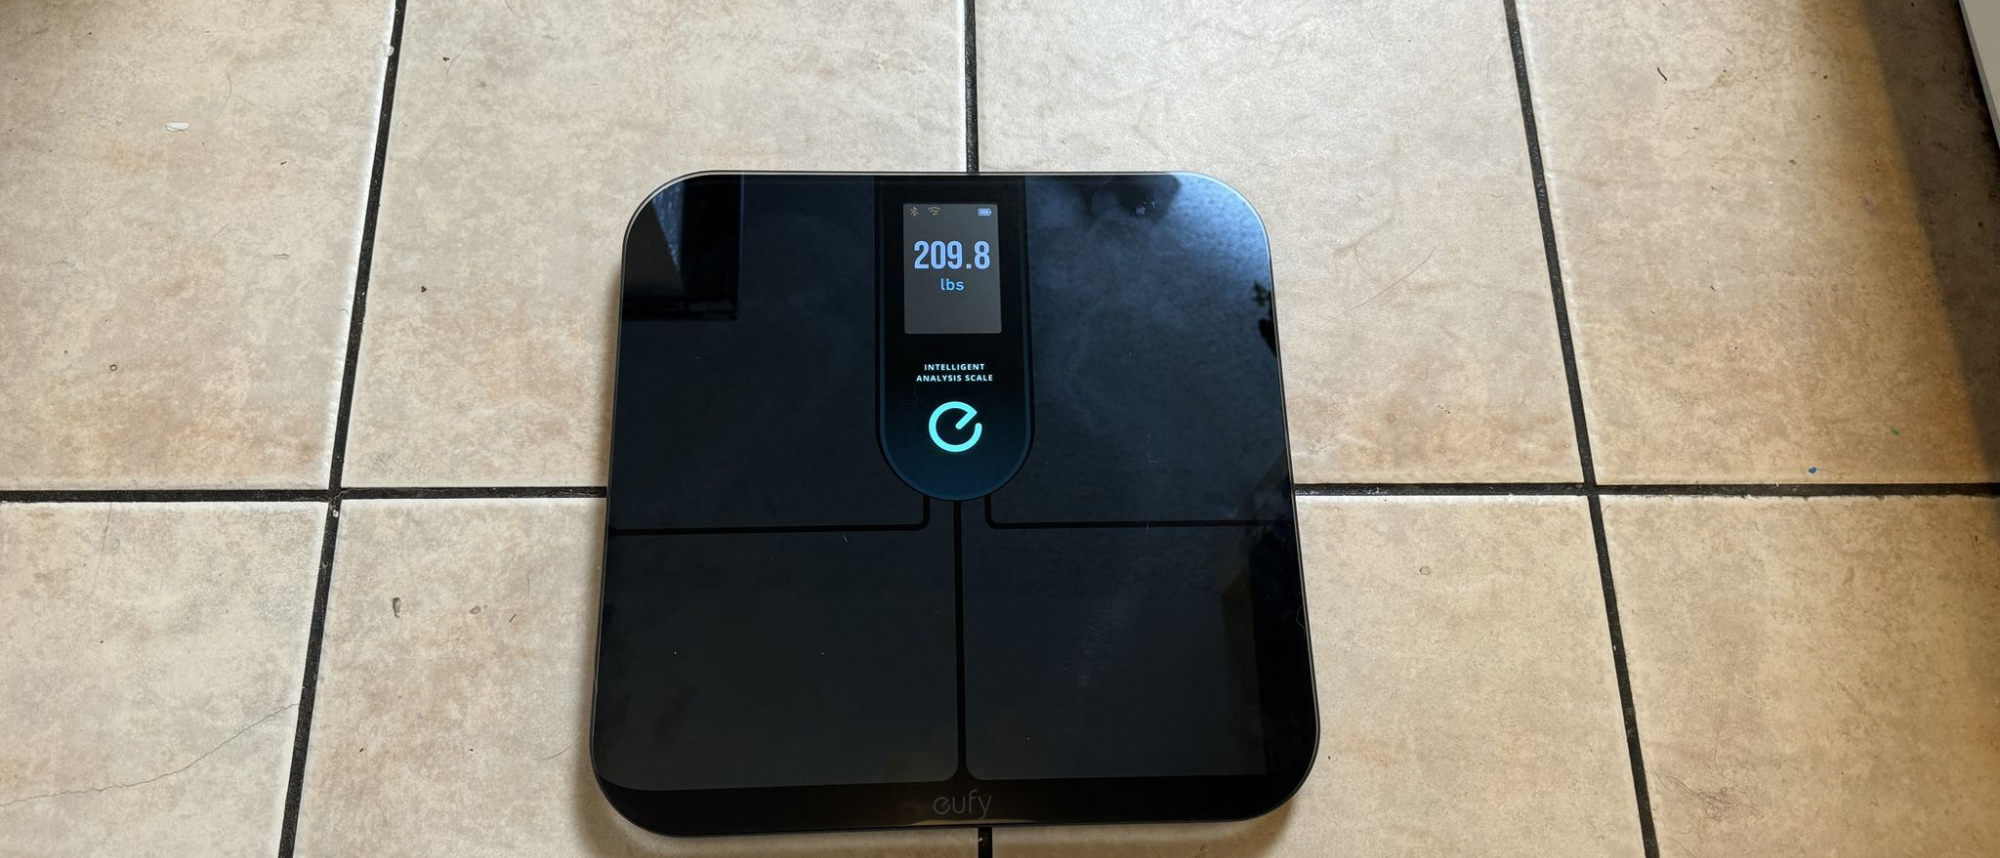 Anker's Eufy P3 is a smart scale with great accuracy at a fair 